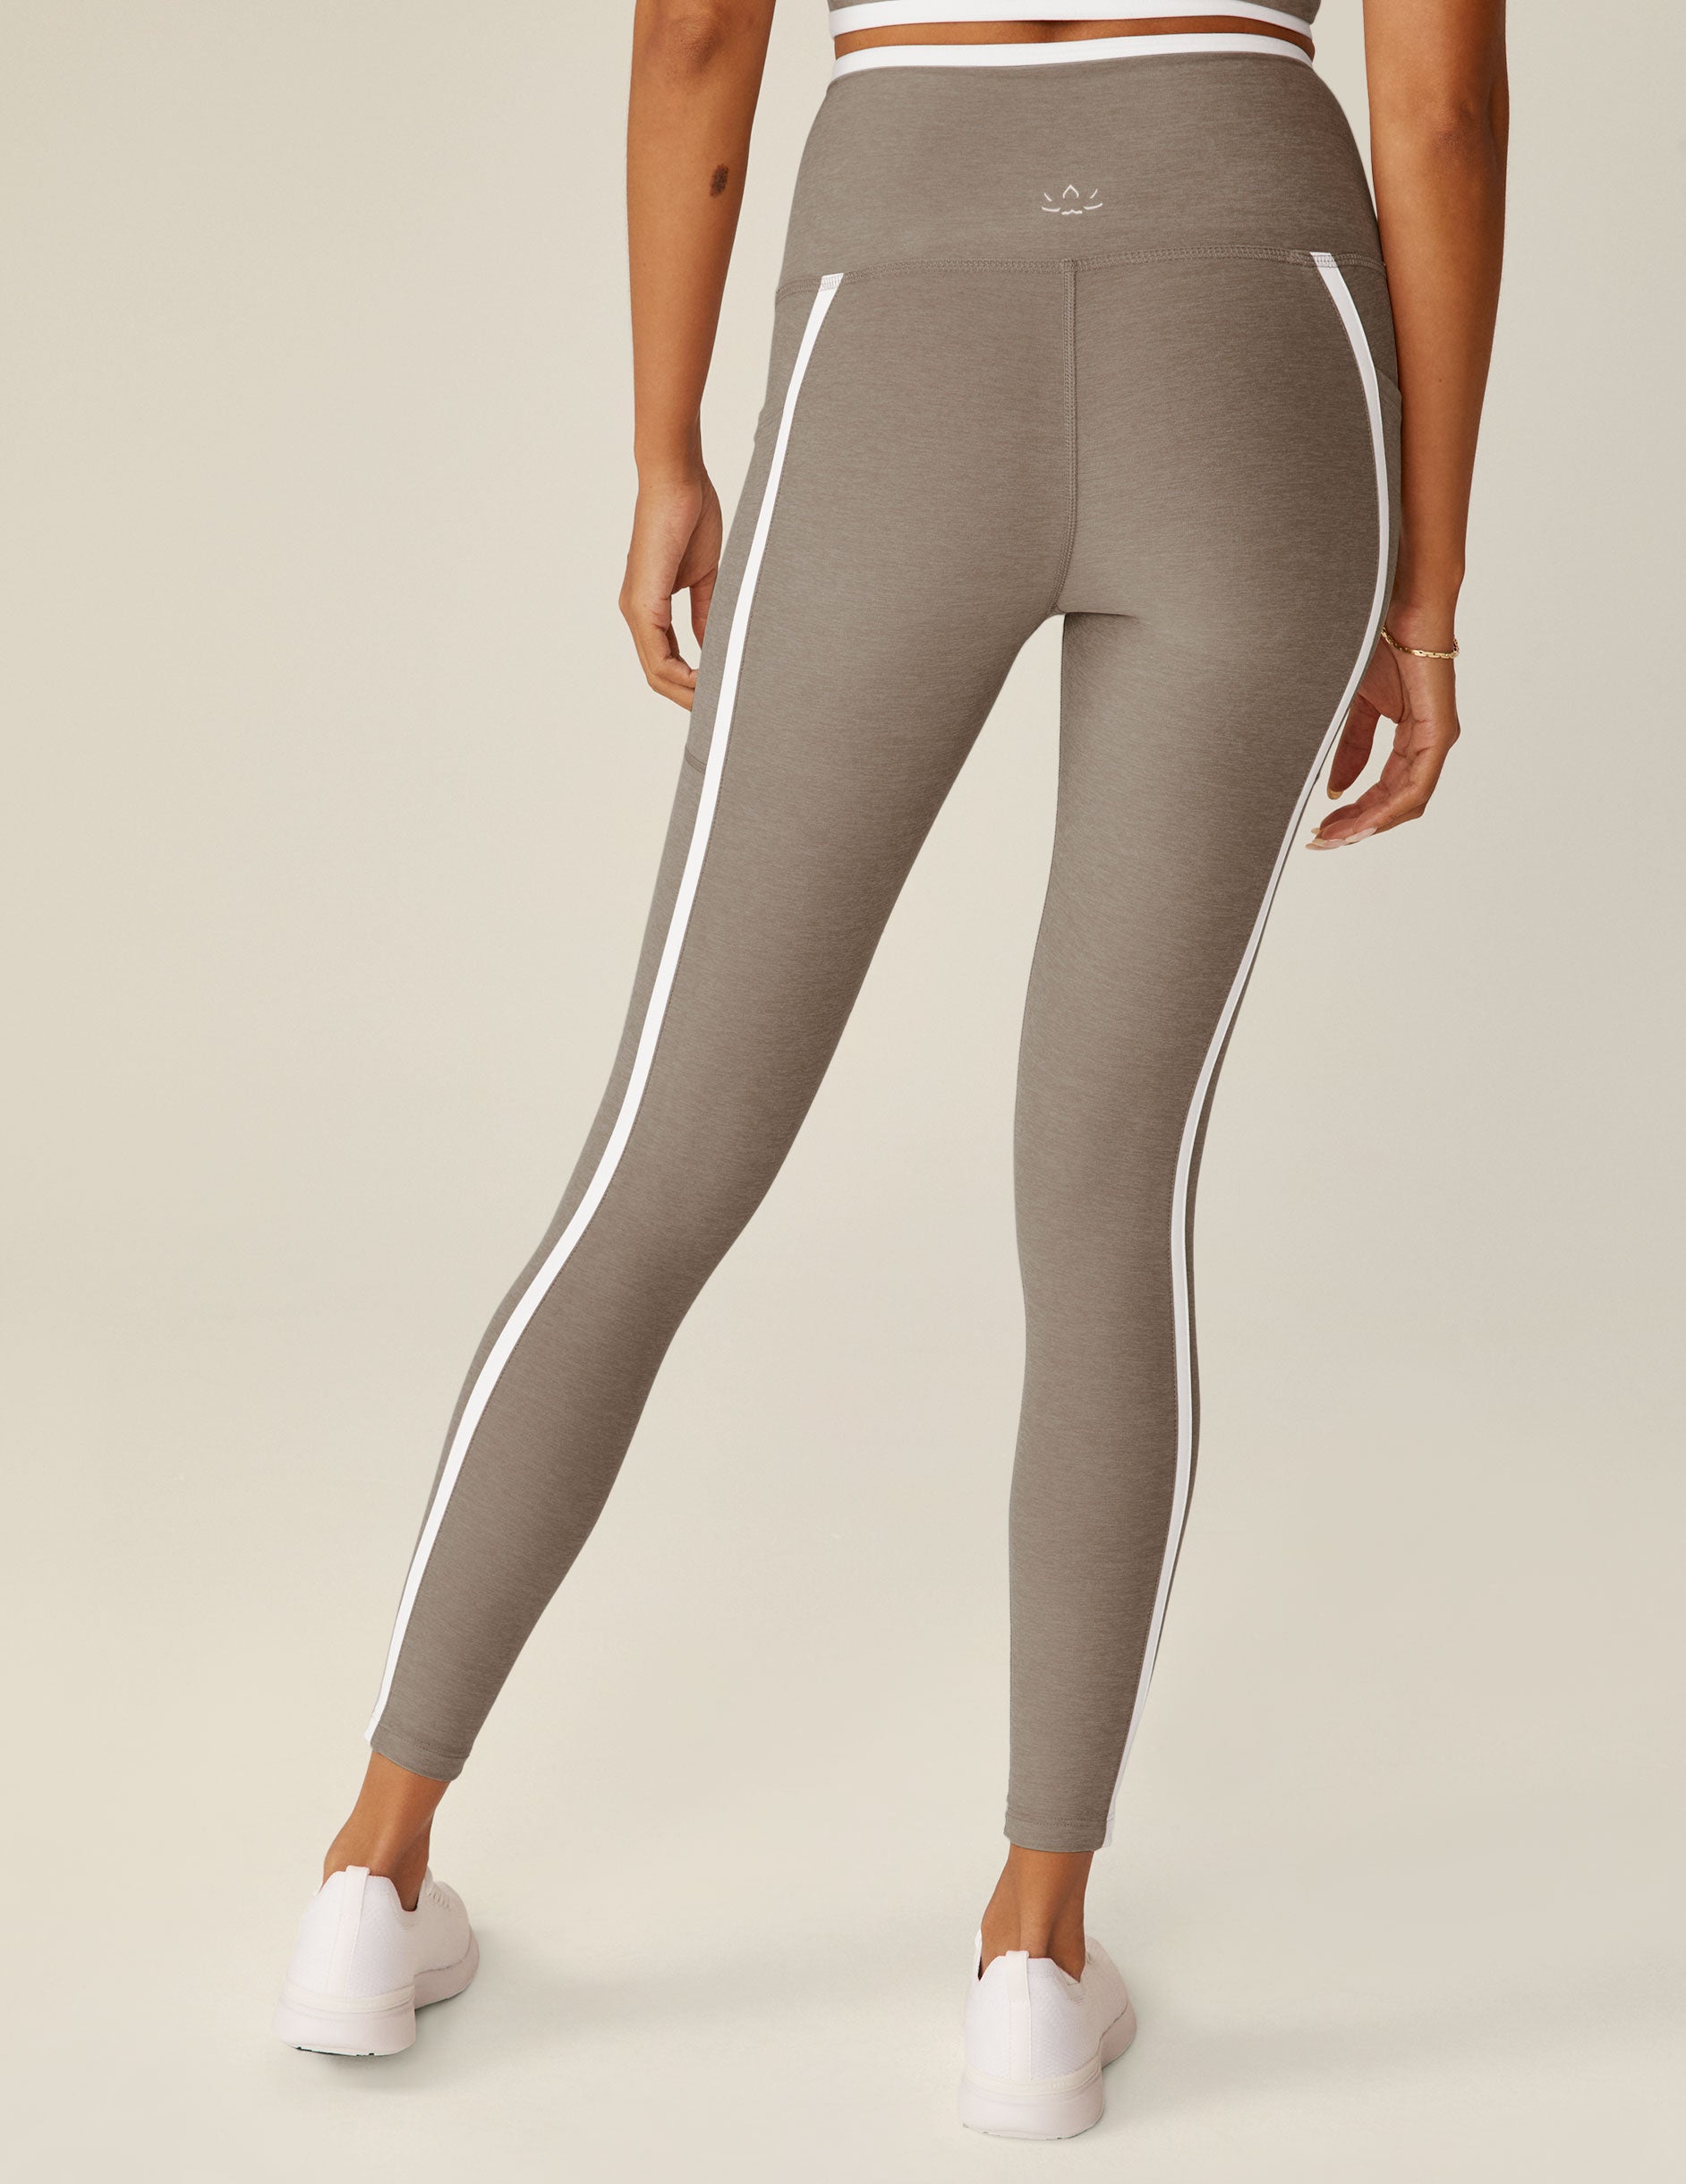 brown high-waisted pocket midi leggings with white line detailing around waistband and down the sides. 